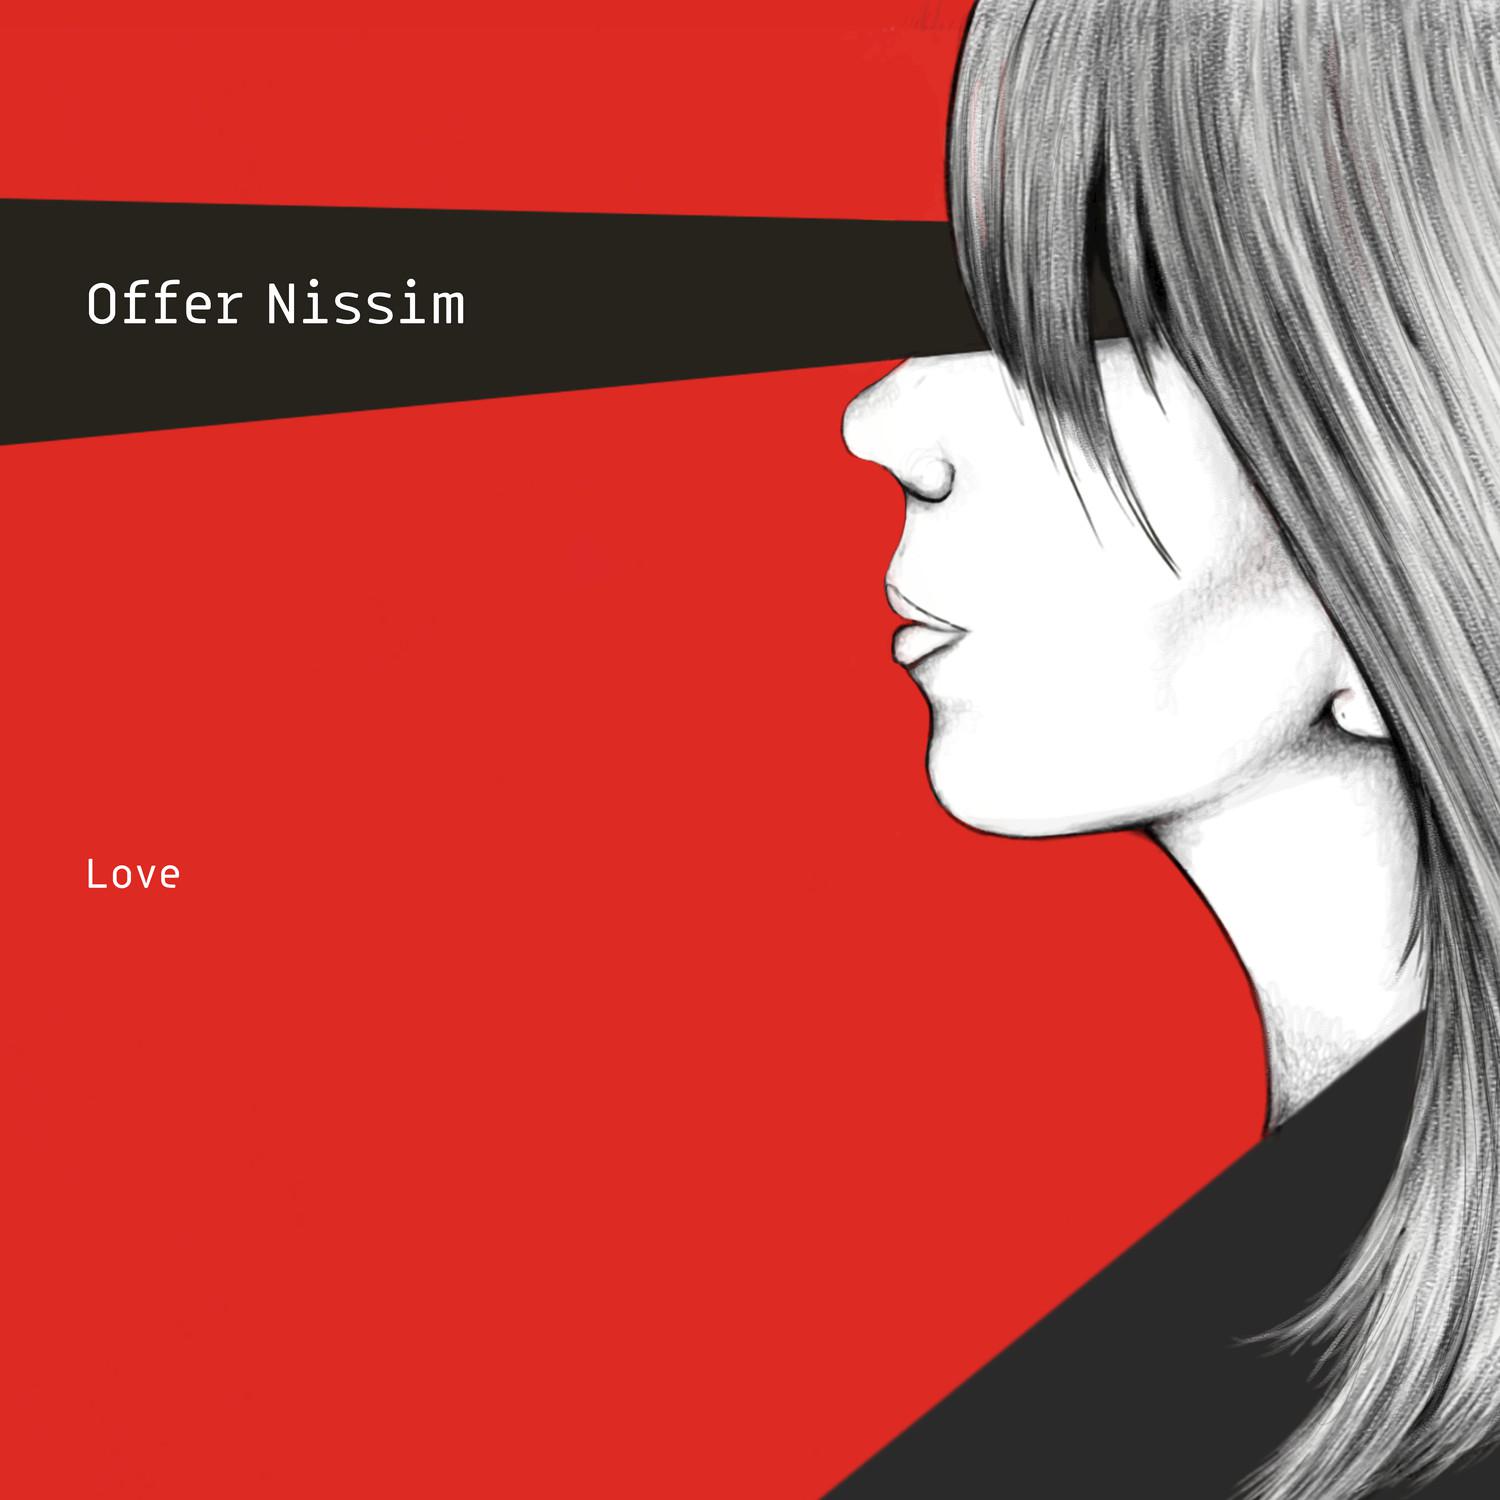 Cryptic Love (Offer Nissim Remix)